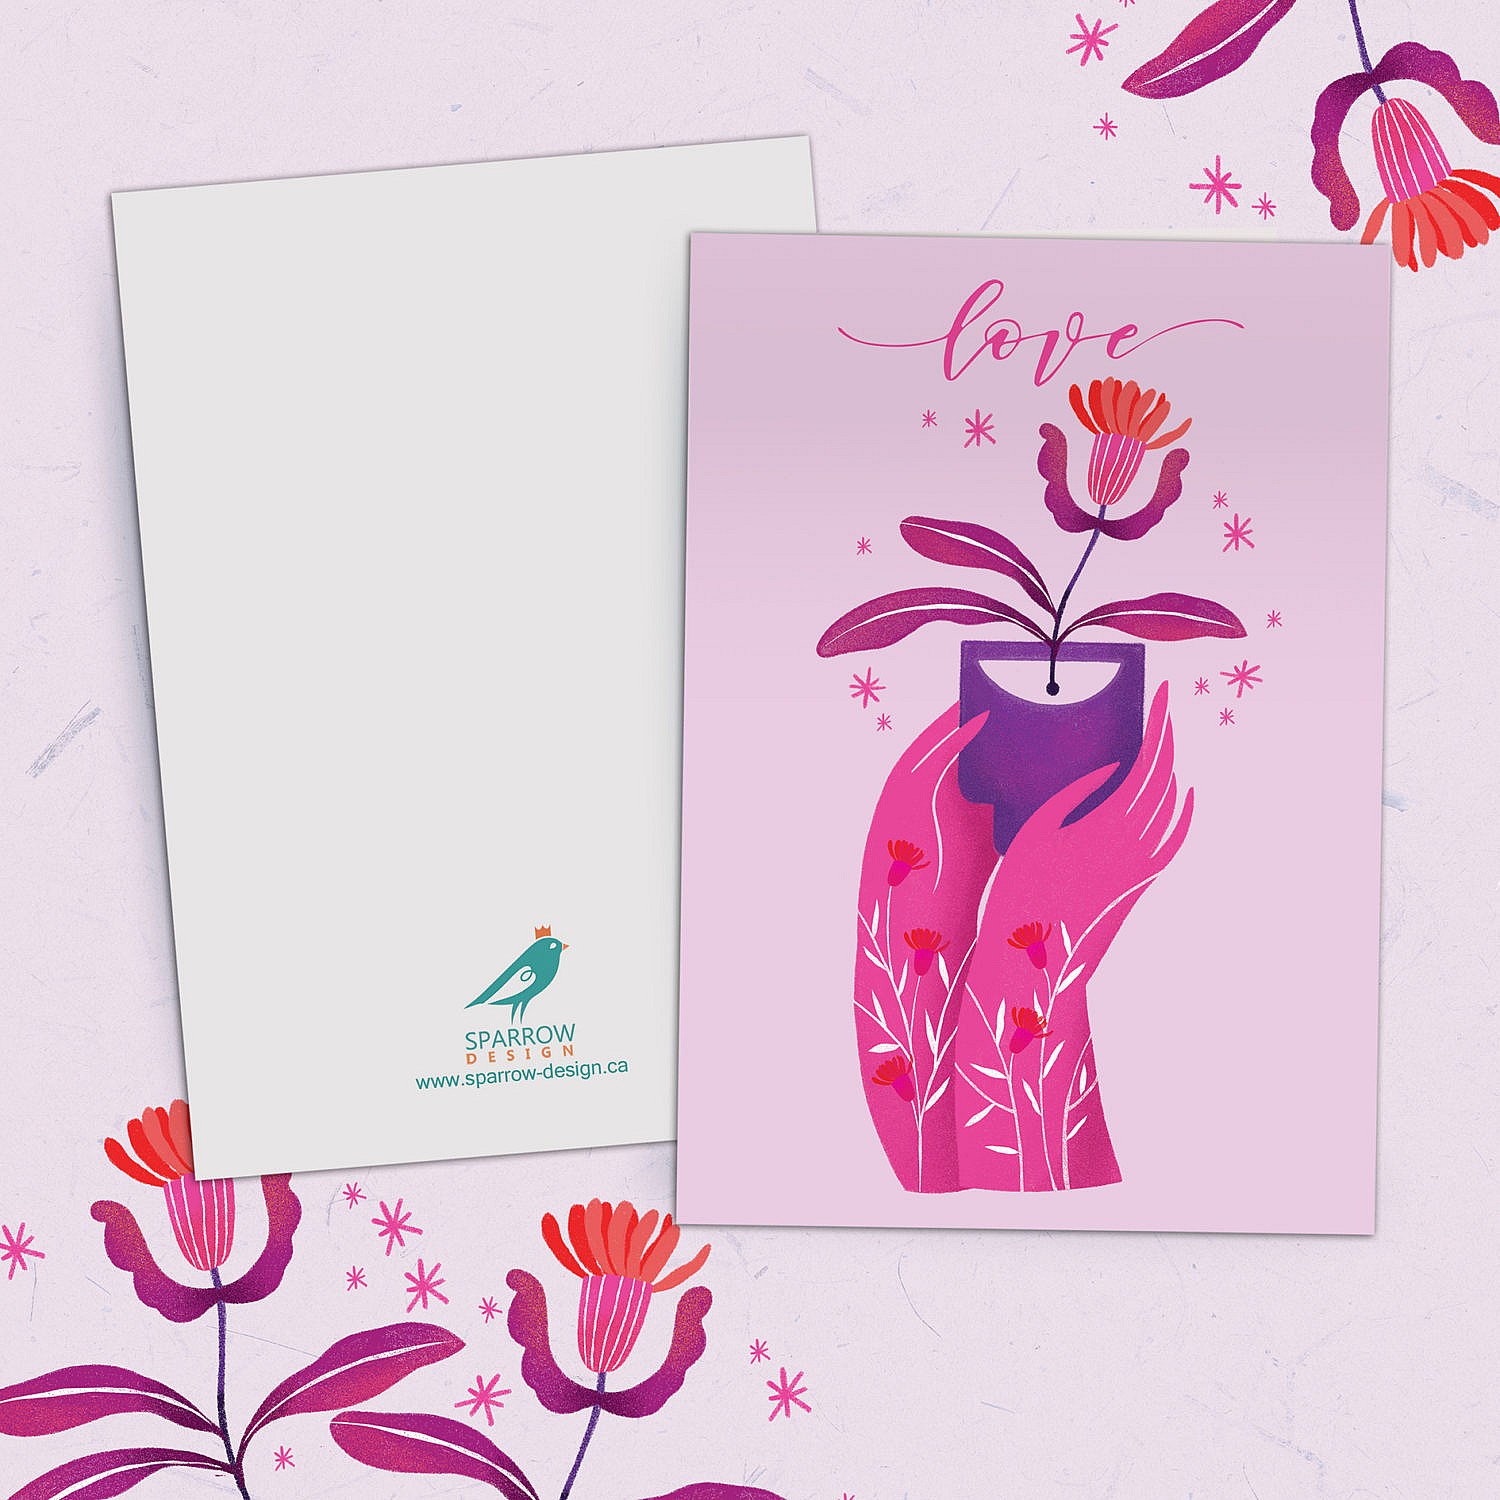 showing a lovely valentine's card. two hands are offering a beautiful flower. The illustration is mostly pink.